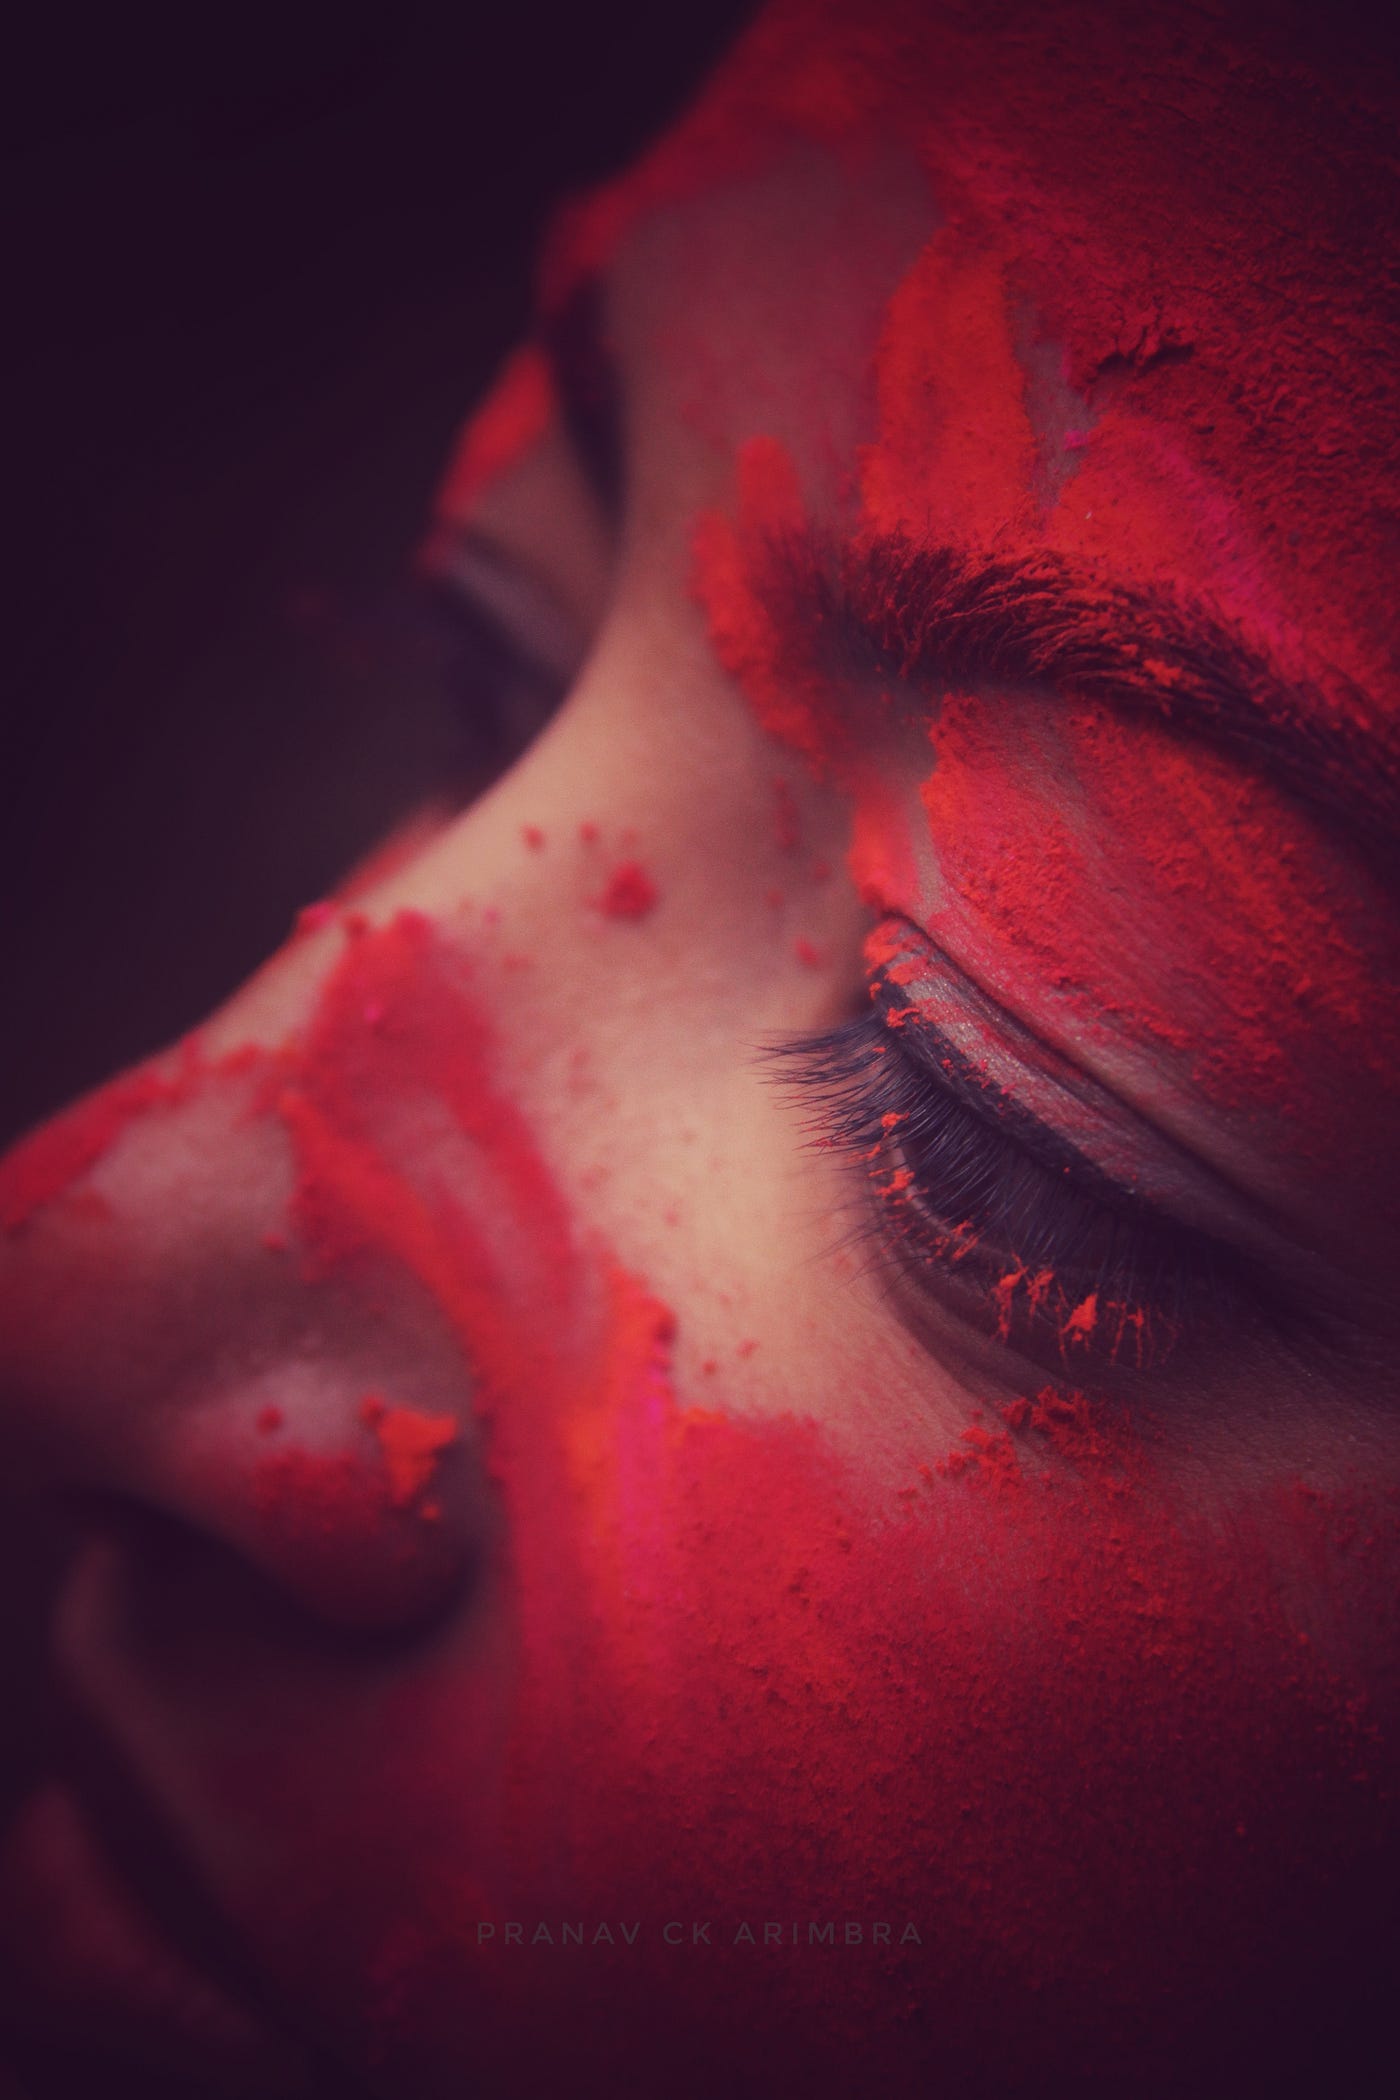 Woman with face in close-up, red paint splashed across her white face.